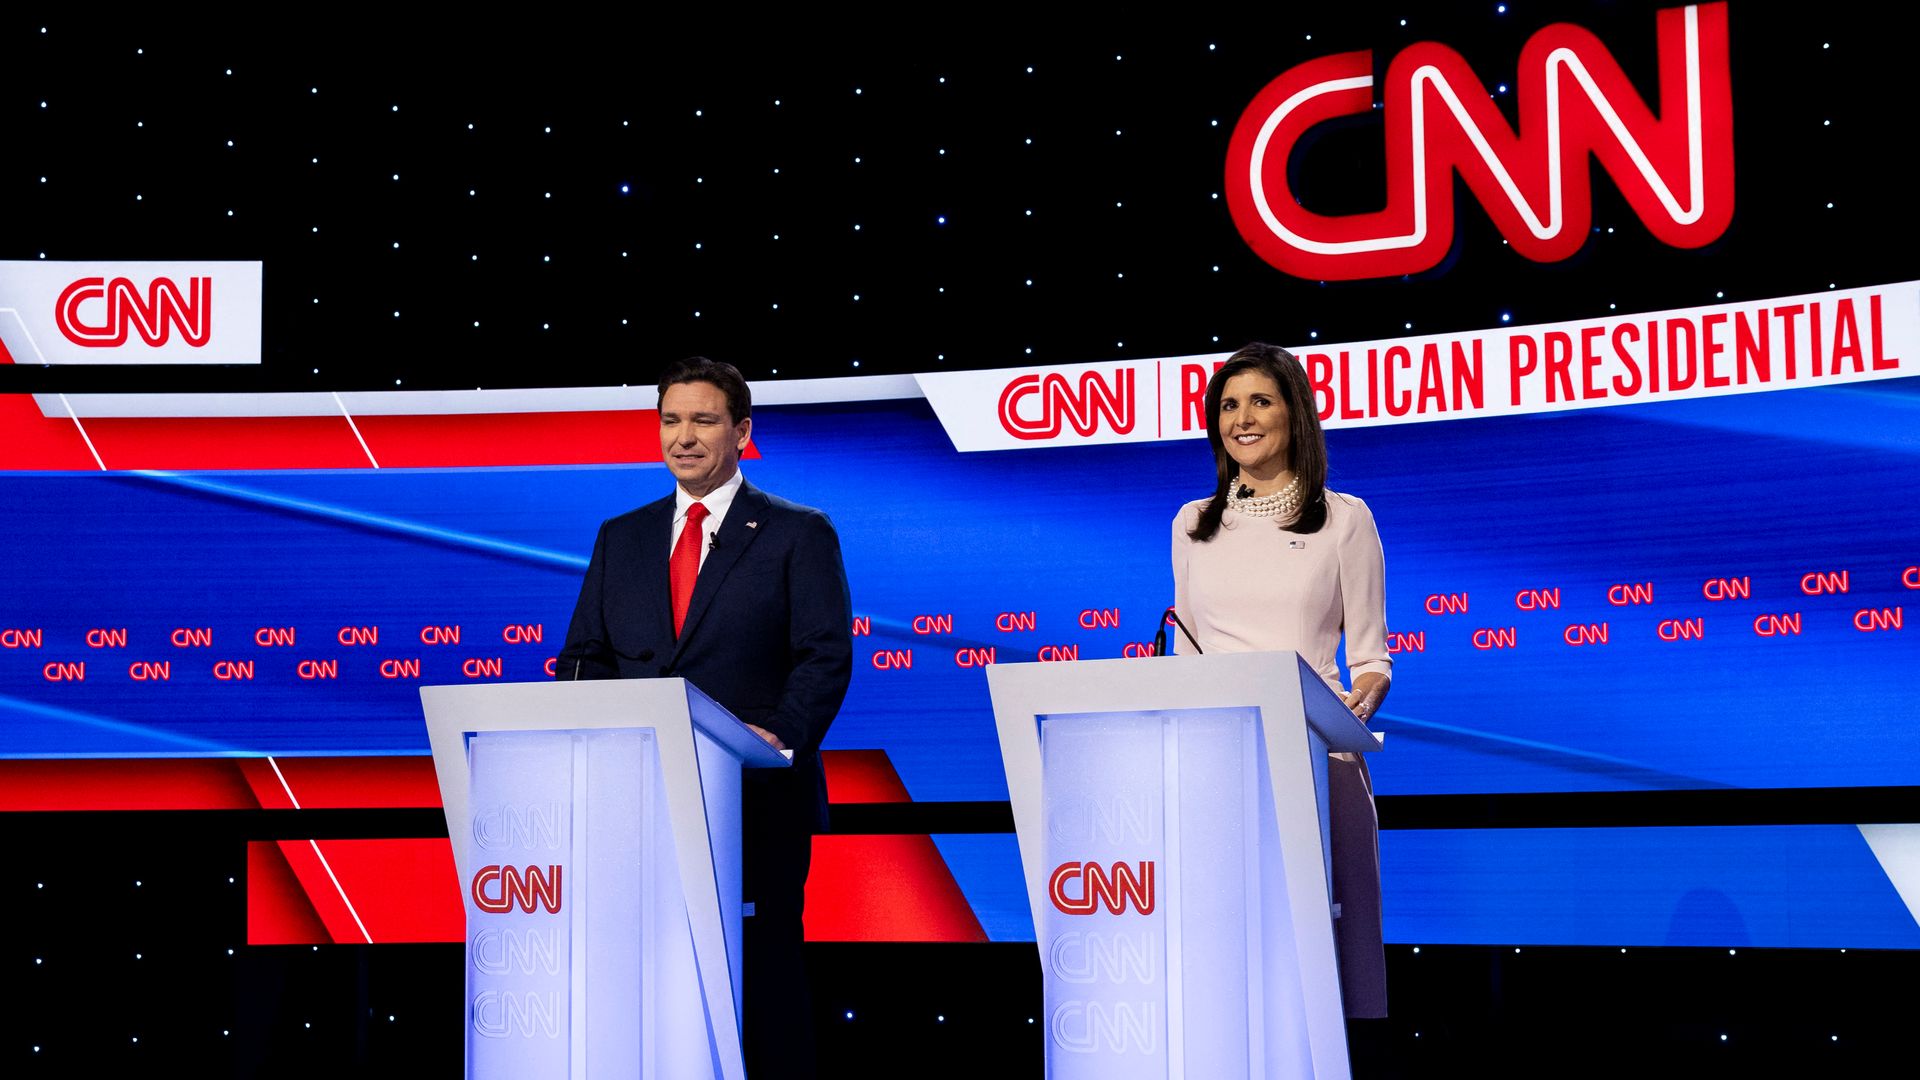 Two Republican candidates took the debate stage while the GOP frontrunner, former President Donald Trump held a town hall at the same time.